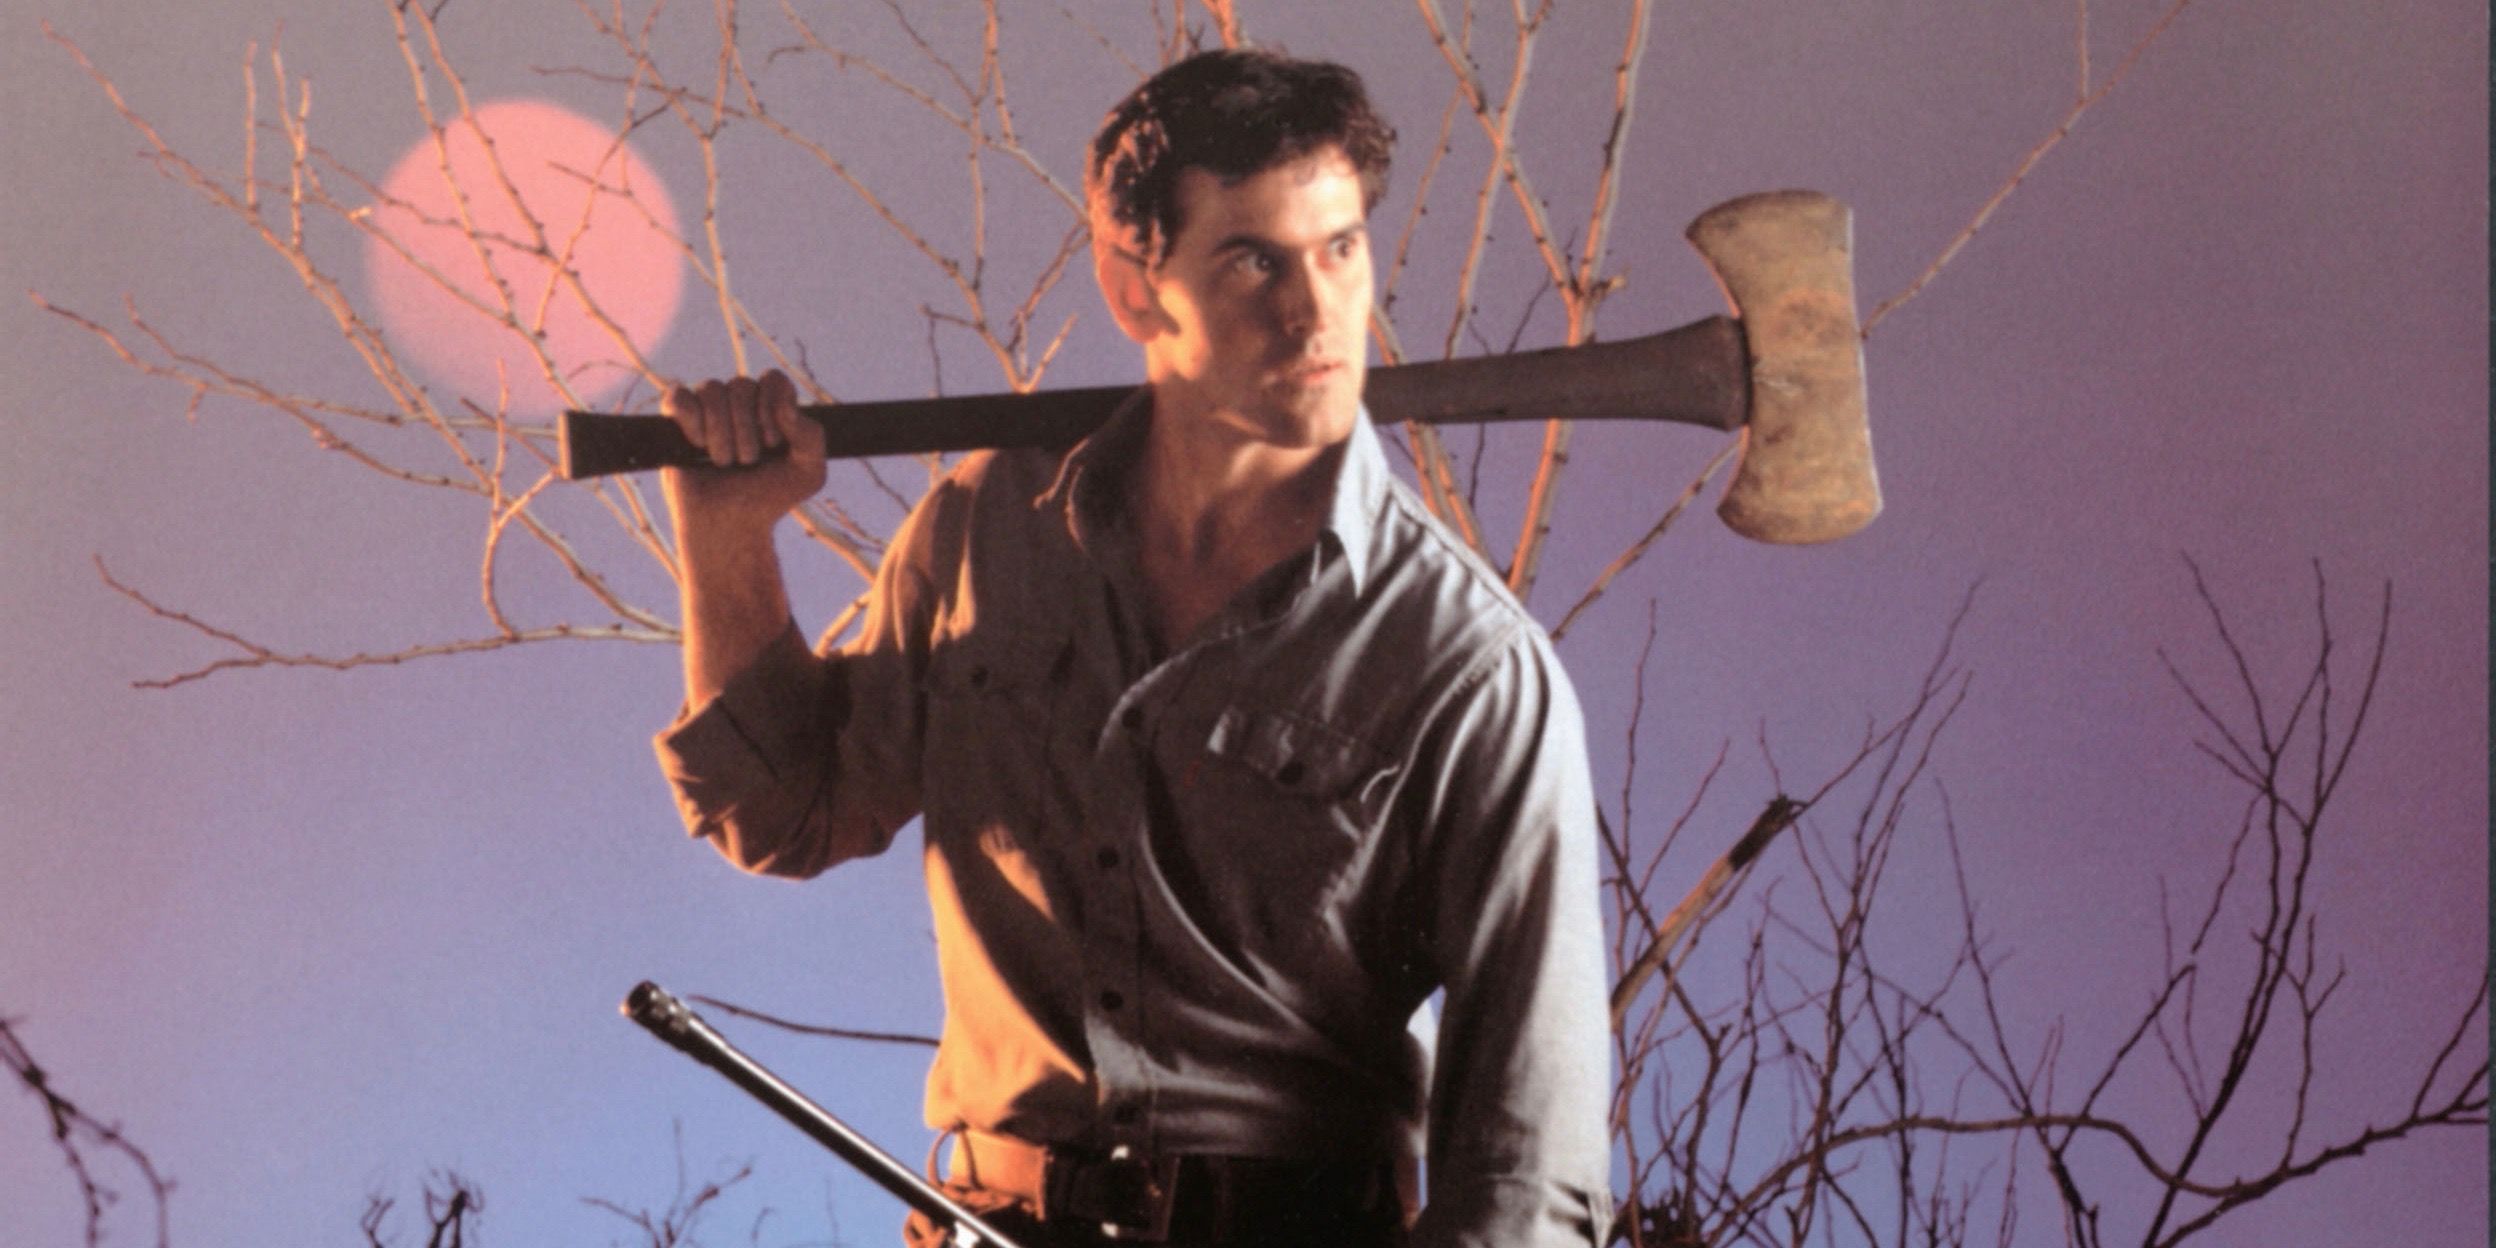 Bruce Campbell as Ash WIlliams in Evil Dead